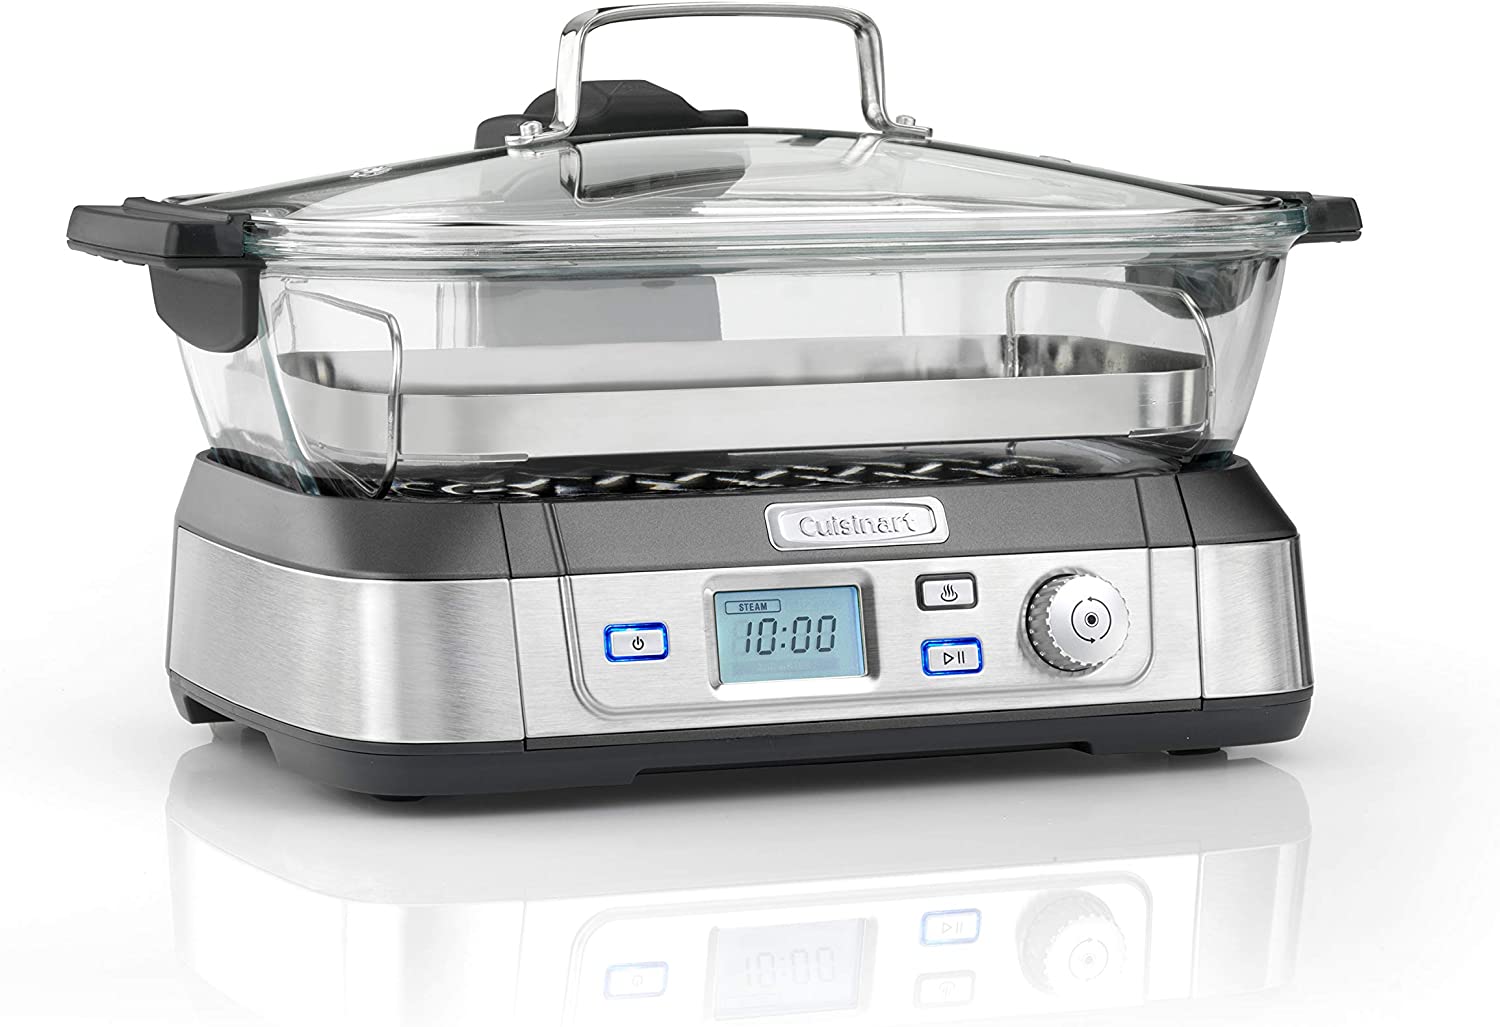 Cuisinart STM1000E Electric Glass Steamer, Digital Displays with Pre-Installed Programmes, Keep Warm Function, Silver/Black, Stainless Steel